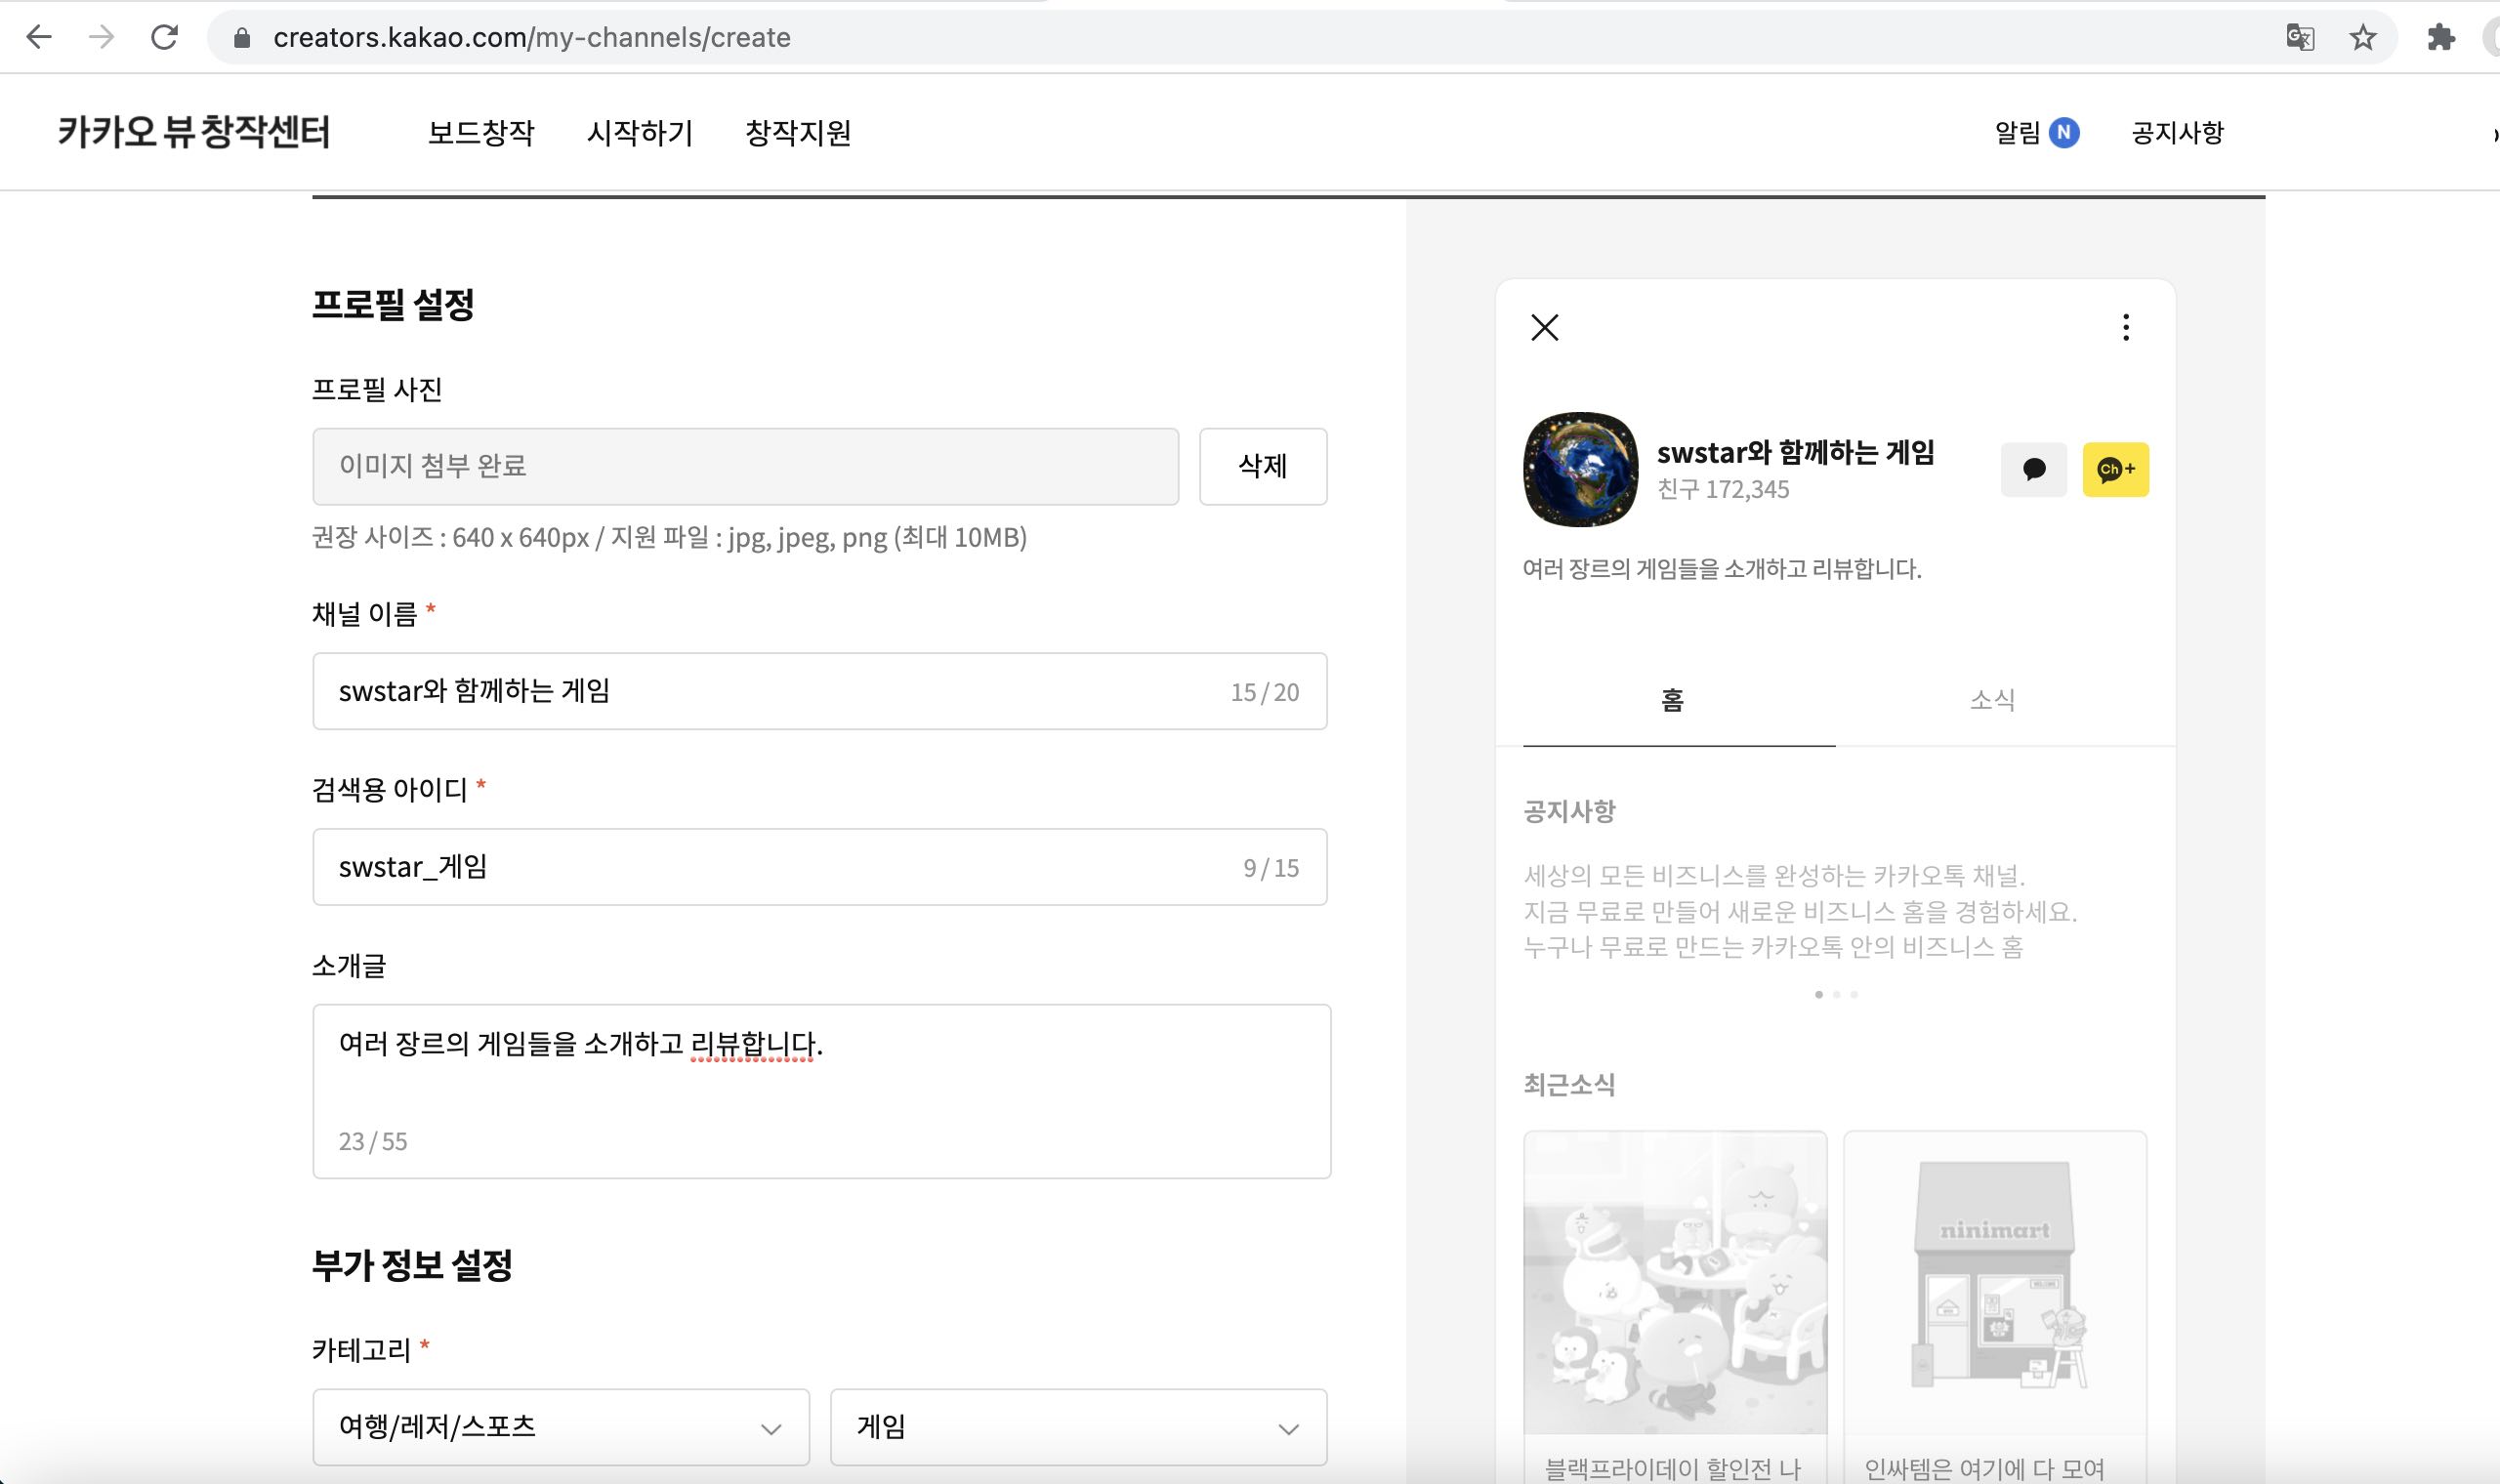 screenshot of Kakao View creation center, showing creation of a new channel